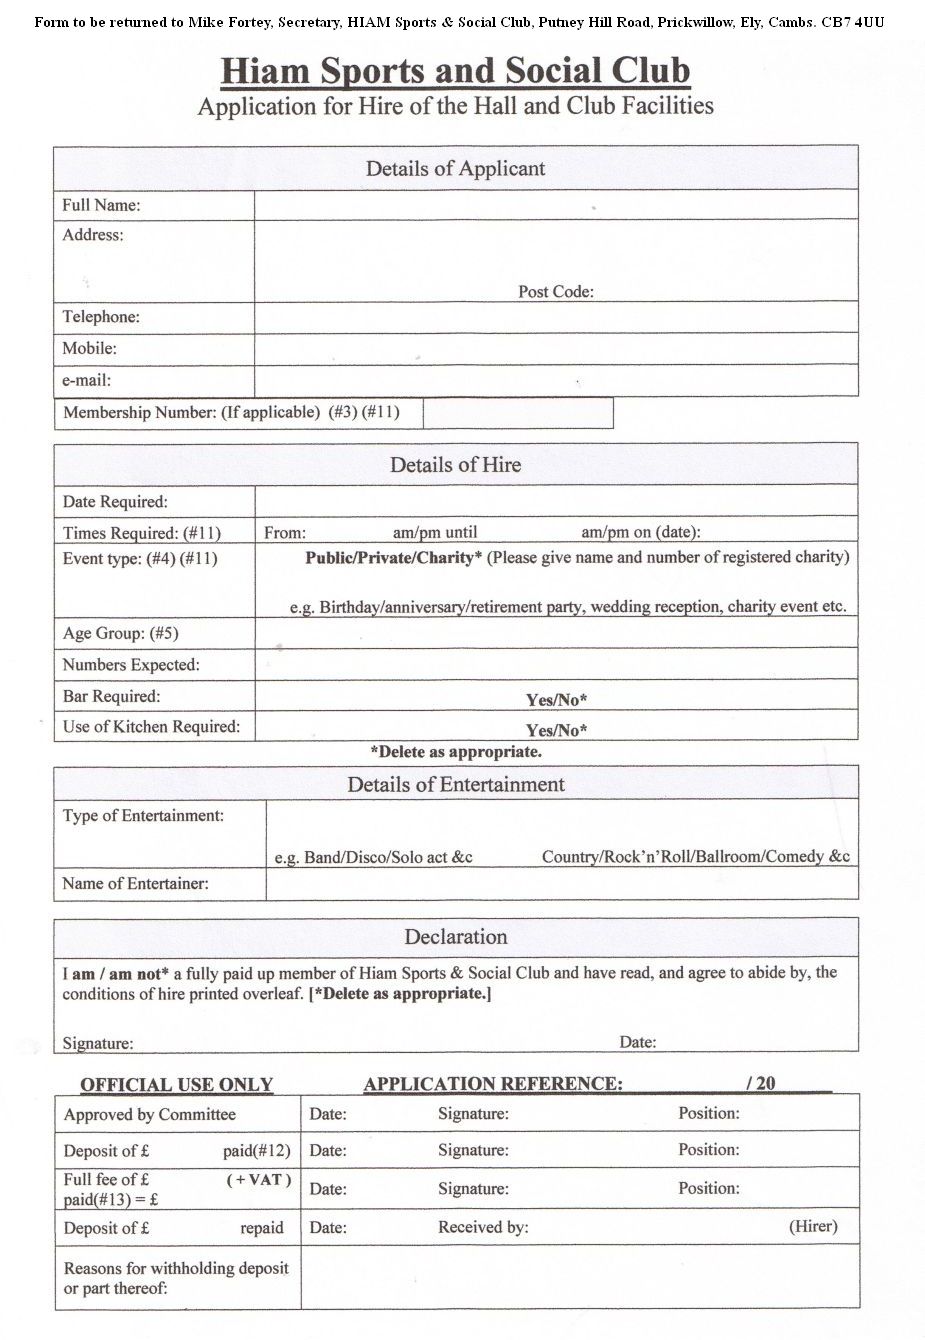 Hall Hire application form